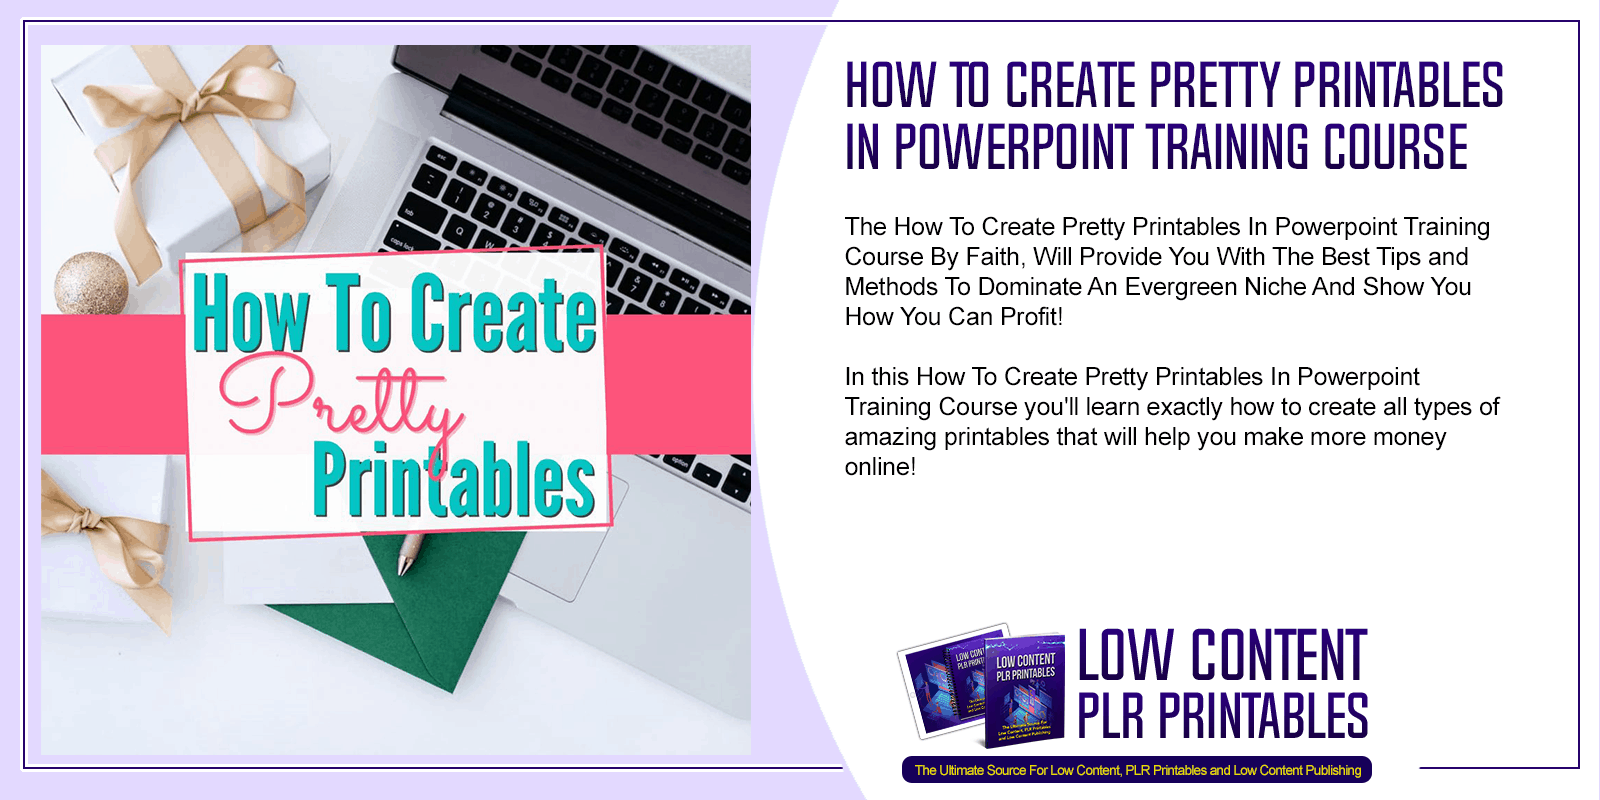 How To Create Pretty Printables In Powerpoint Training Course